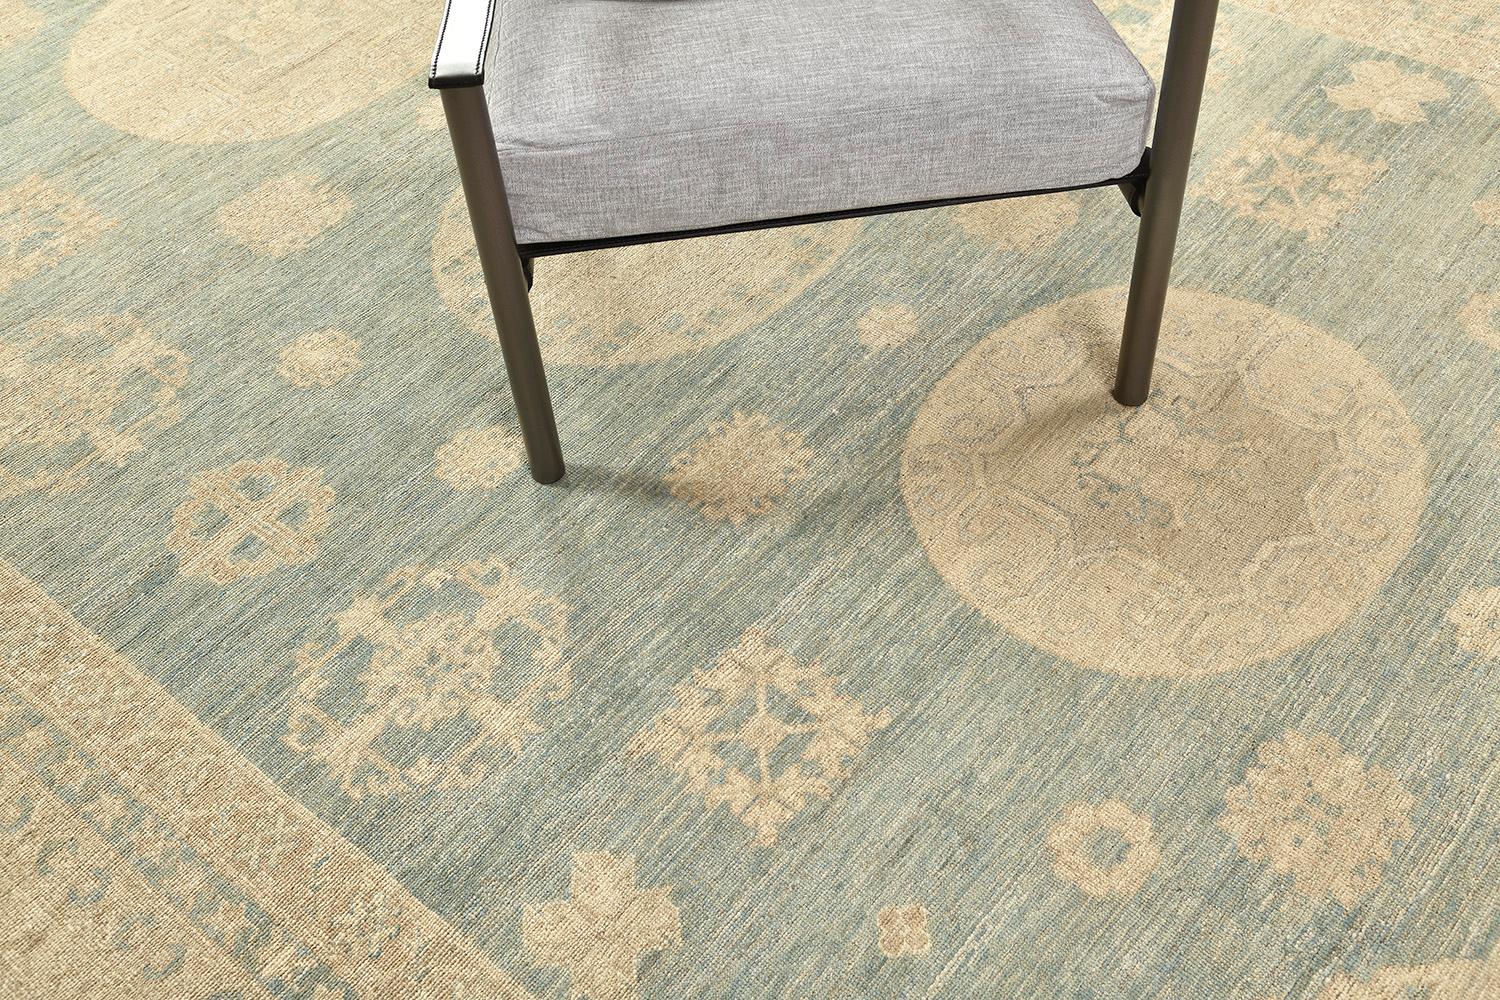 Let this be yours forever with this inviting rug. Faded hues of sage and blues are completing the enchantment of this masterwork. Three vast medallions surrounded by scattered motifs and elements add to the charm. This decor is rich in geometrical